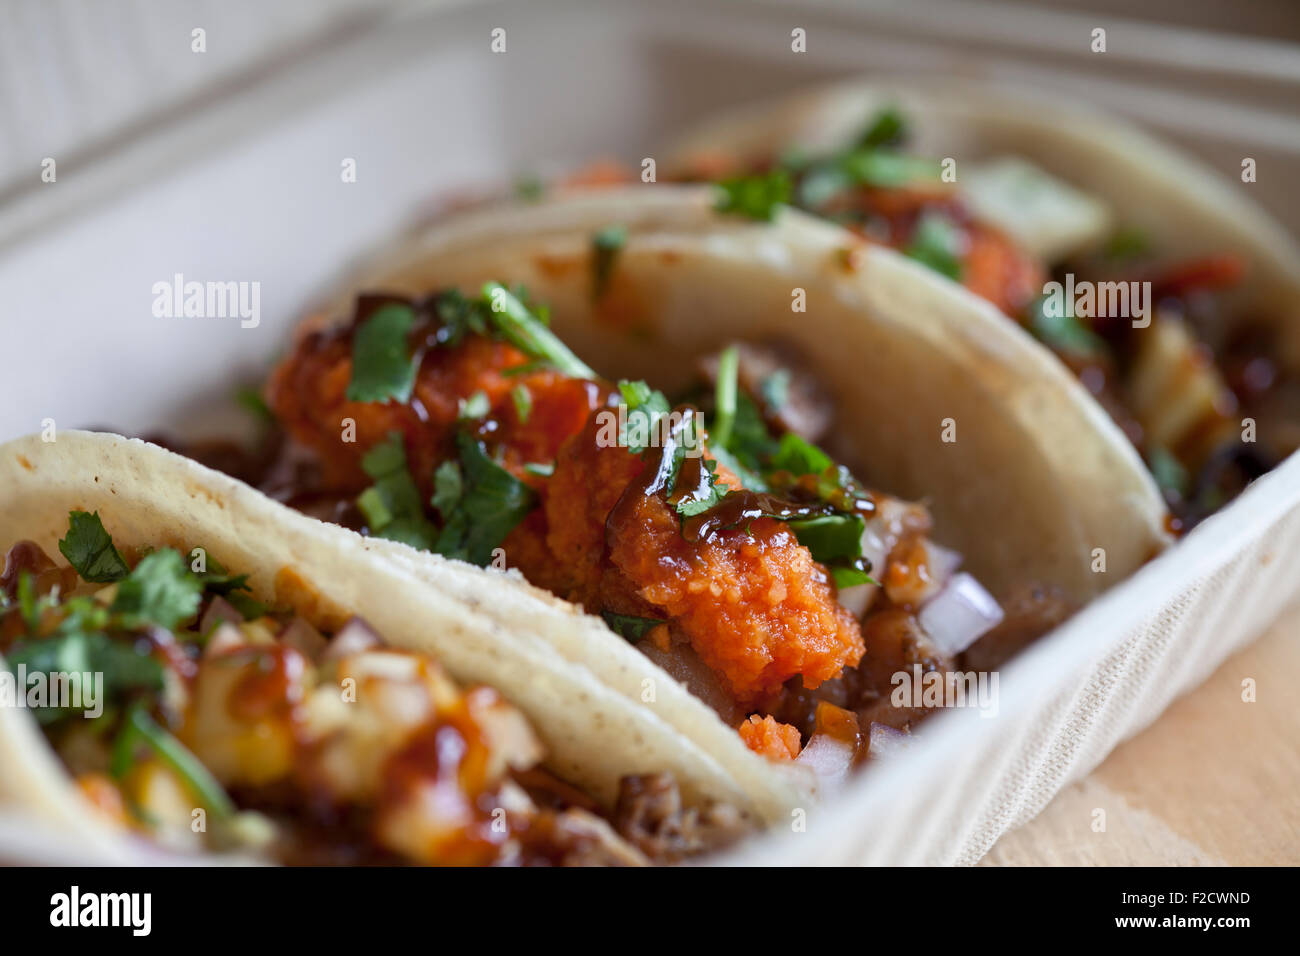 Diagonal side view  of three different tacos in an open to-go container Stock Photo